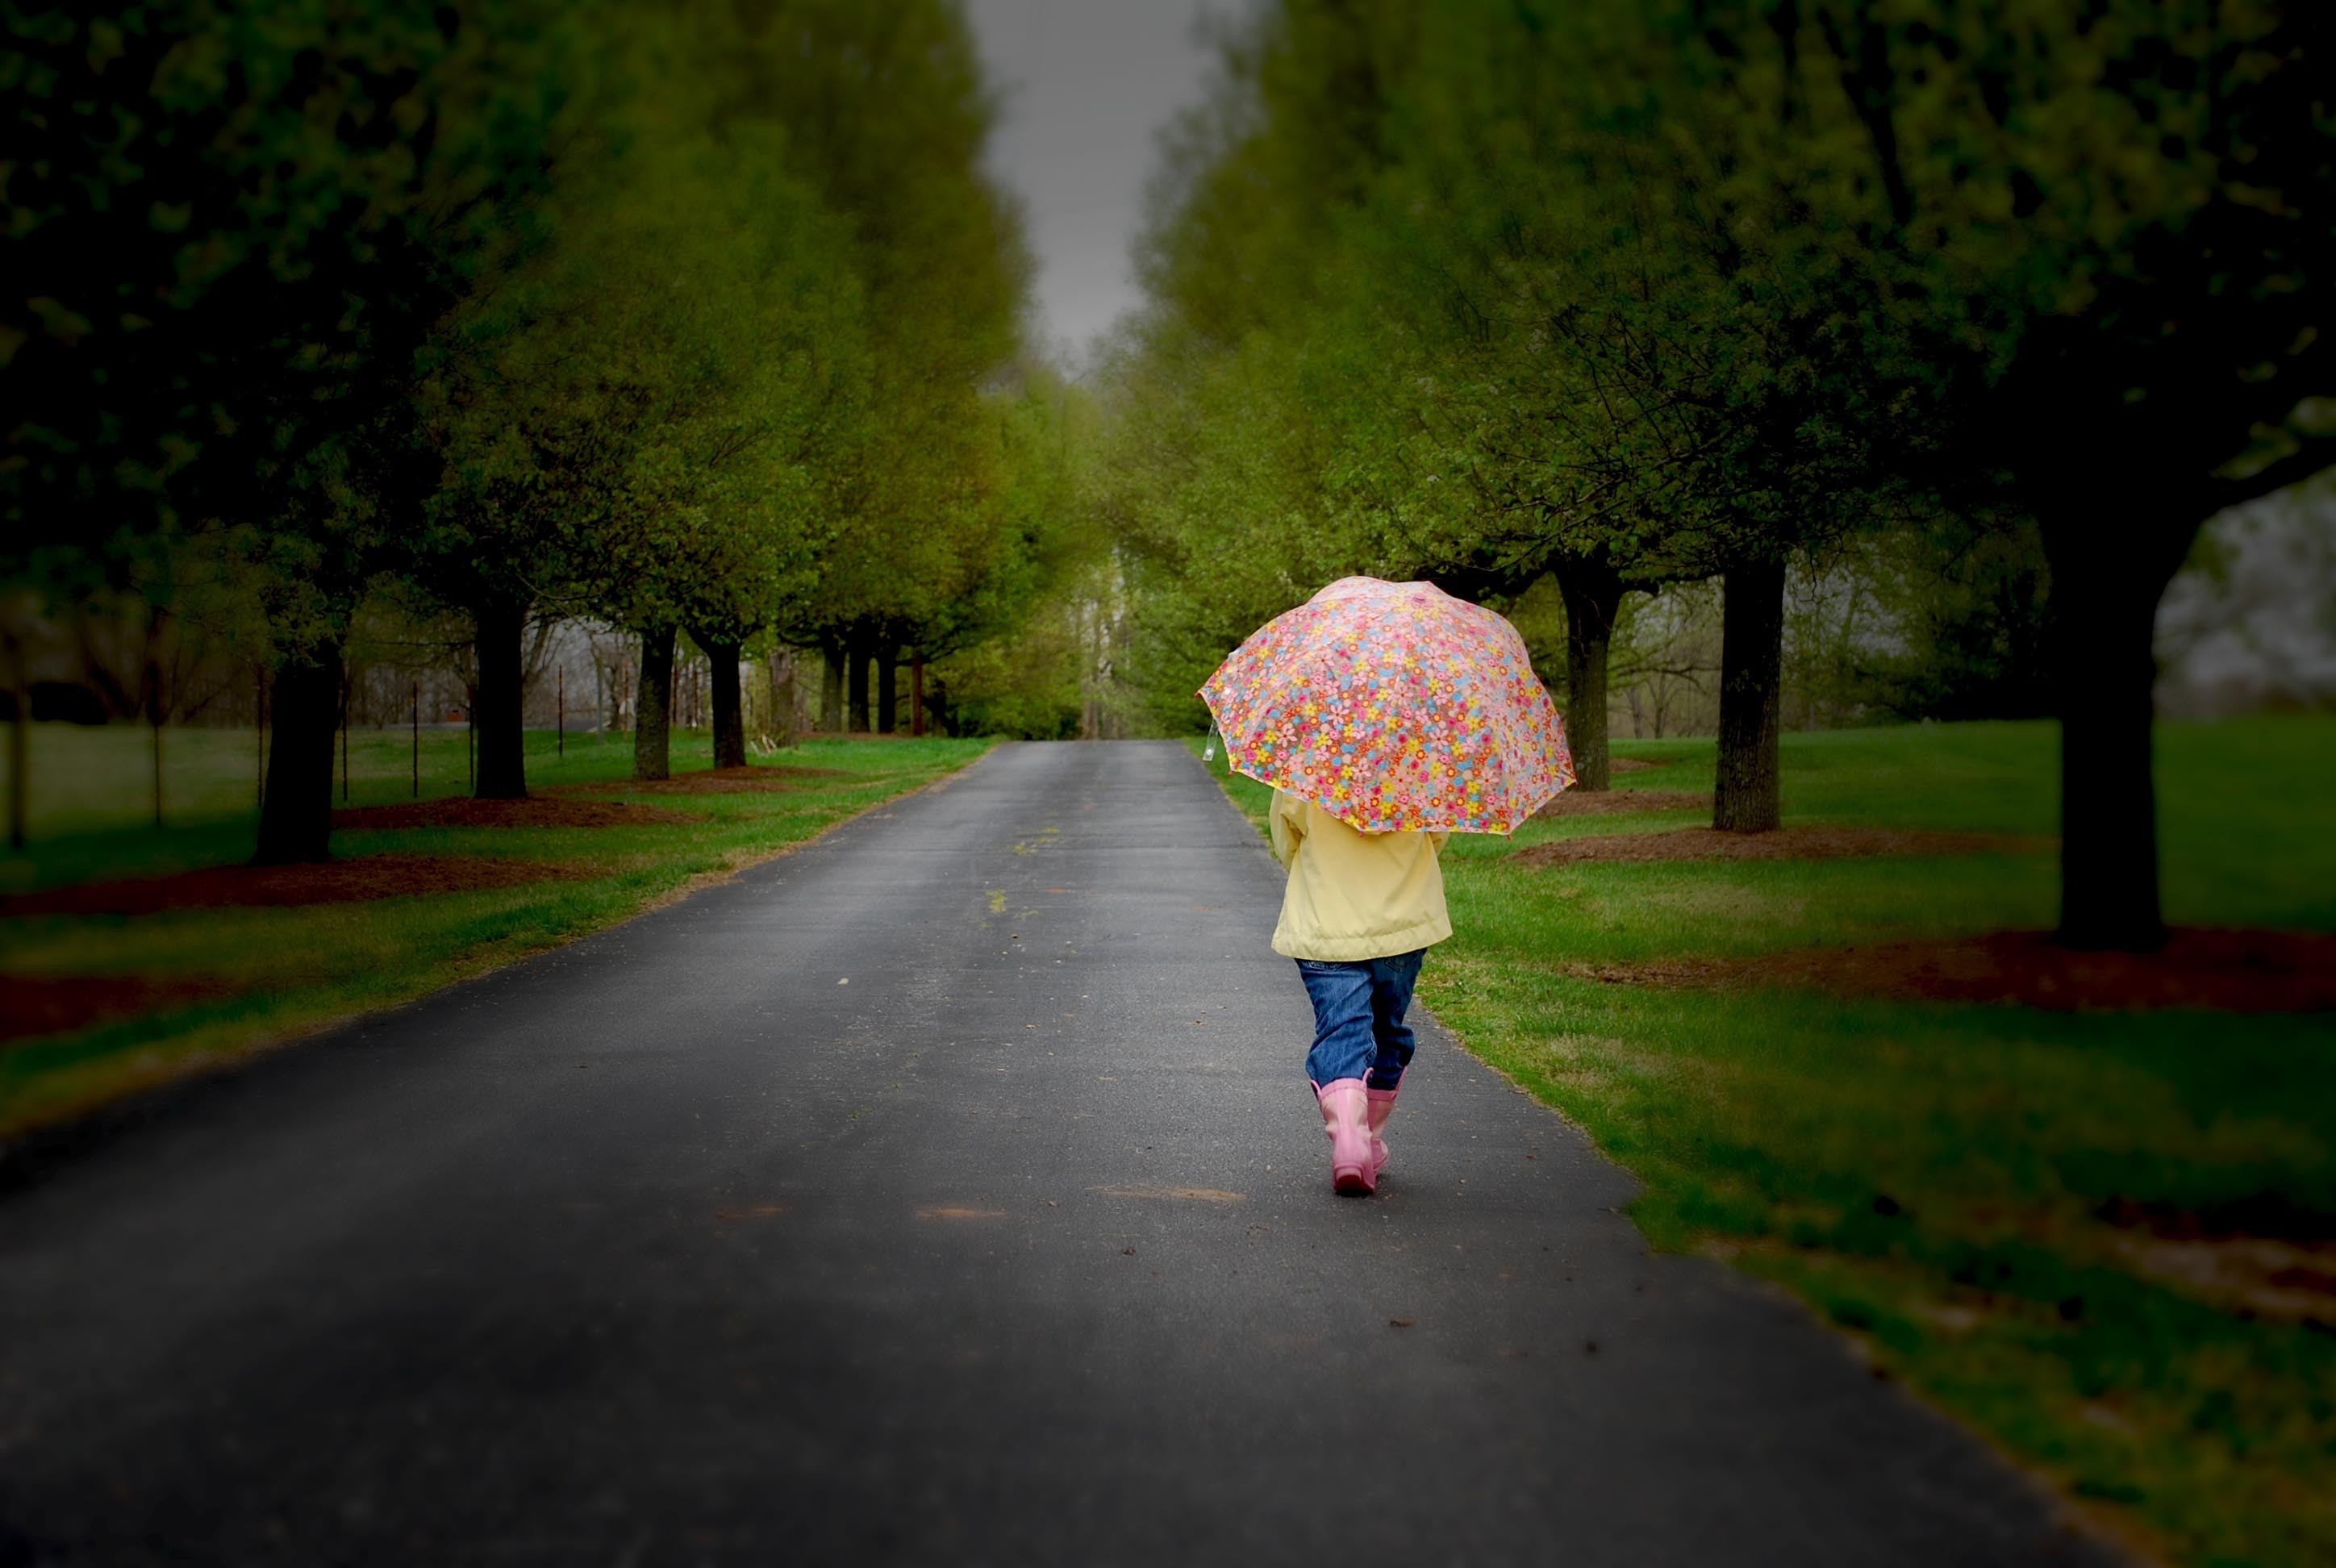 park, wood, miscellanea, miscellaneous, road, tree, stroll, overcast, mainly cloudy, umbrella 2160p